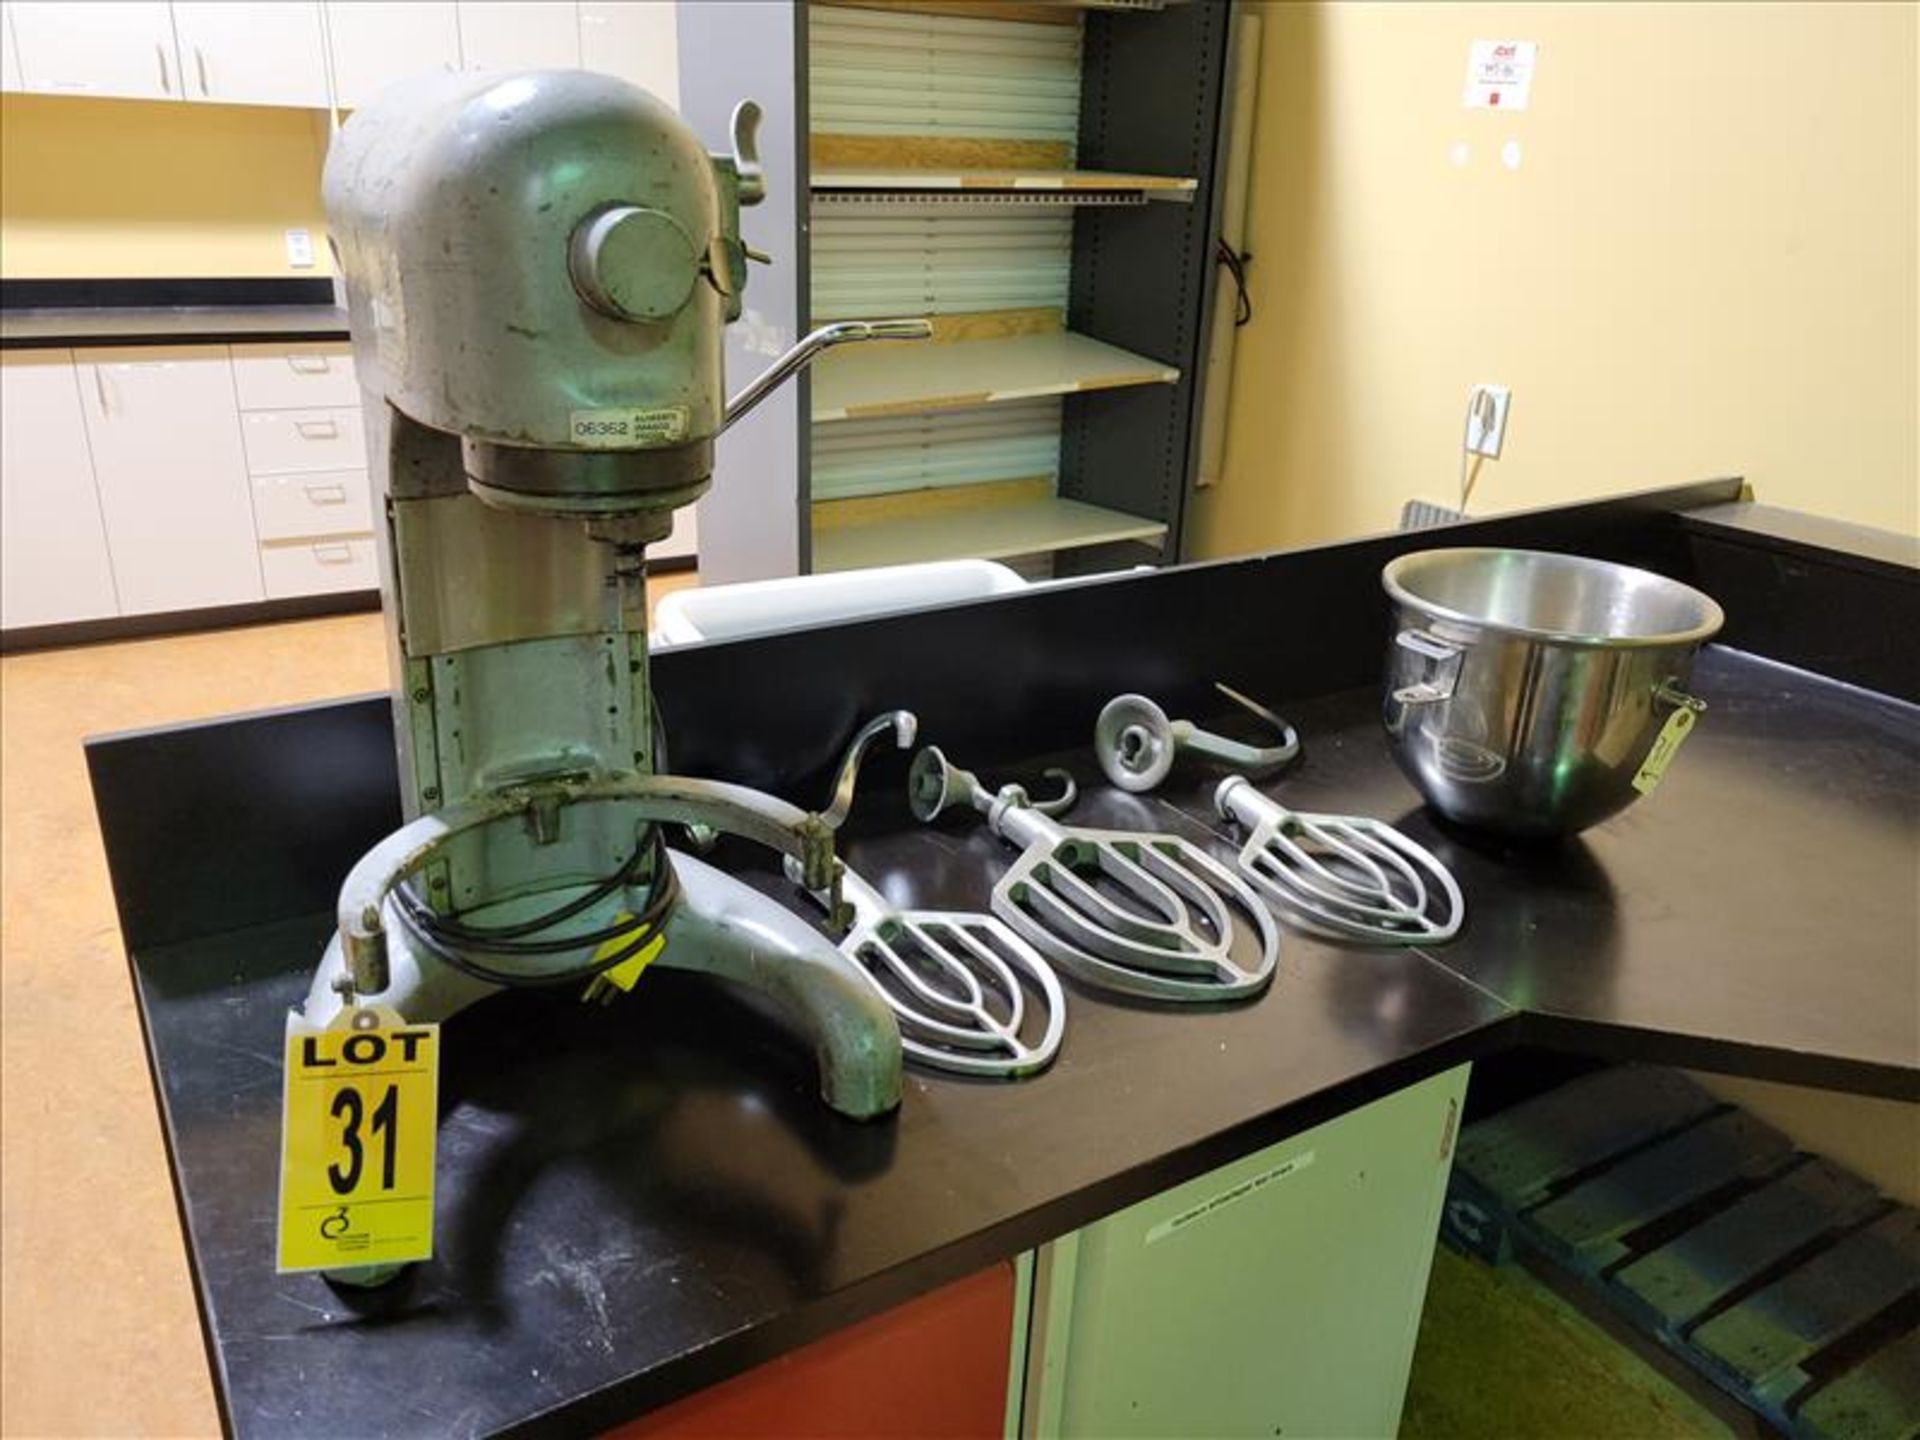 HOBART Table Top Mixer, mod. C100, ser. 1241670, 1750 Speed, 110 Volts, 1 Phase, with S/S Mixing